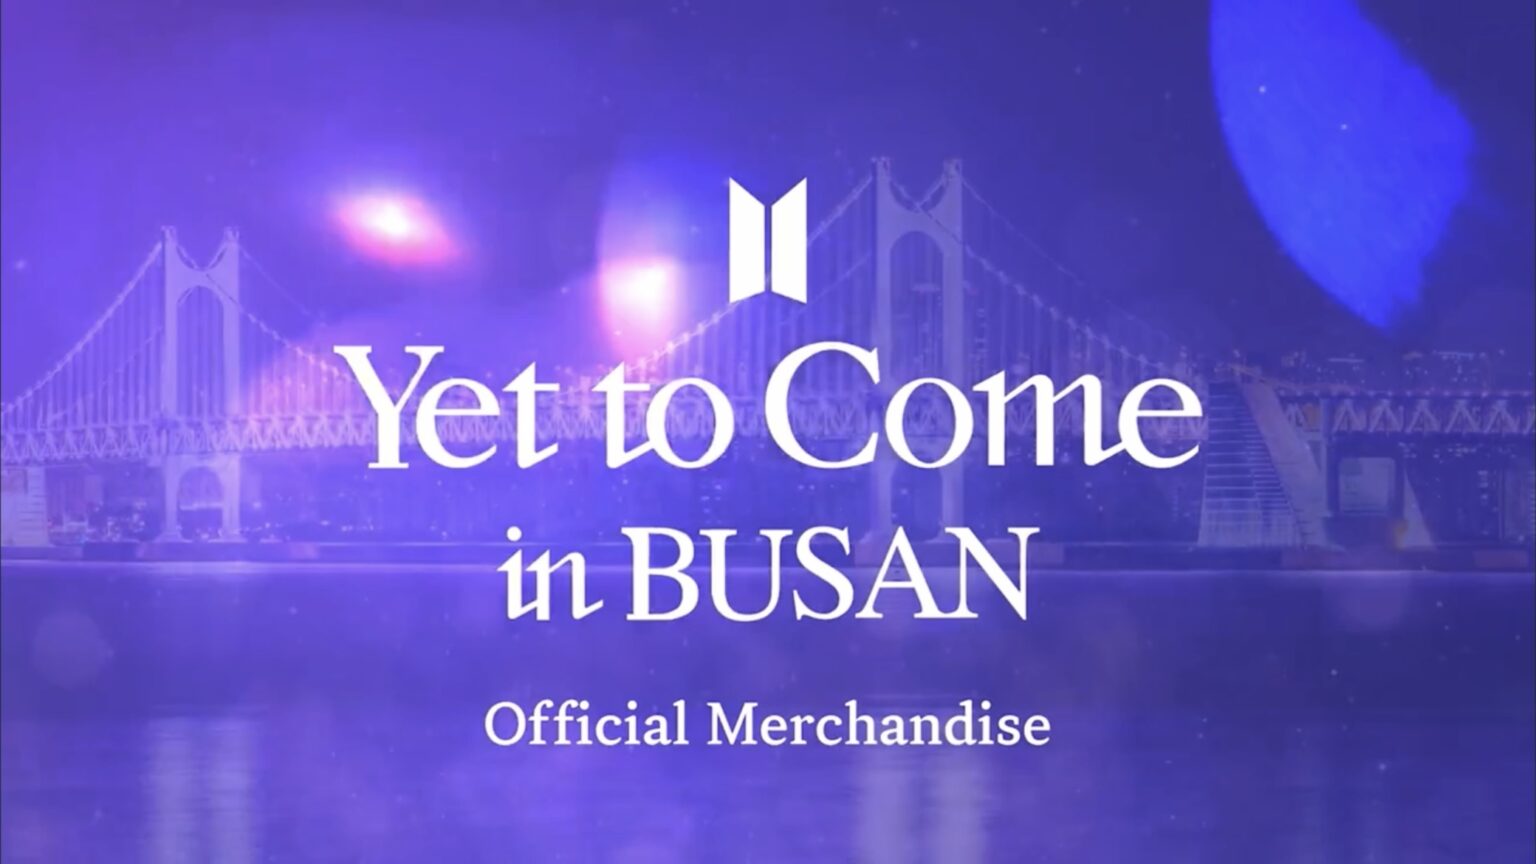 BTS 釜山コンサート「Yet To Come in BUSAN」の公式グッズの追加販売が 